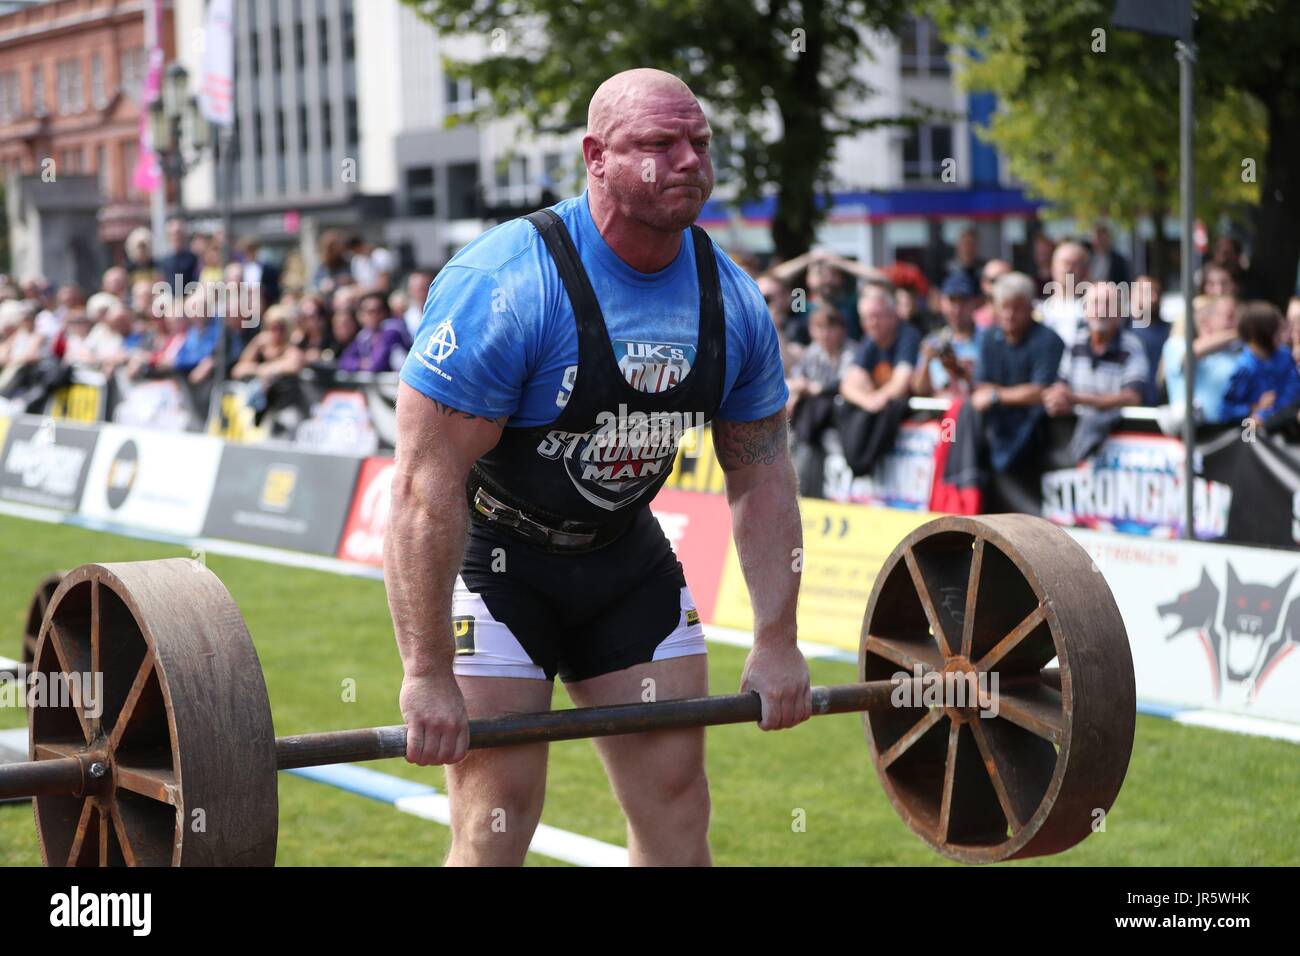 England's Mark Snape competes in the Axel Dead lift during the UK Strongest Man 2017 heats at Belfast City Hall, Belfast. Stock Photo